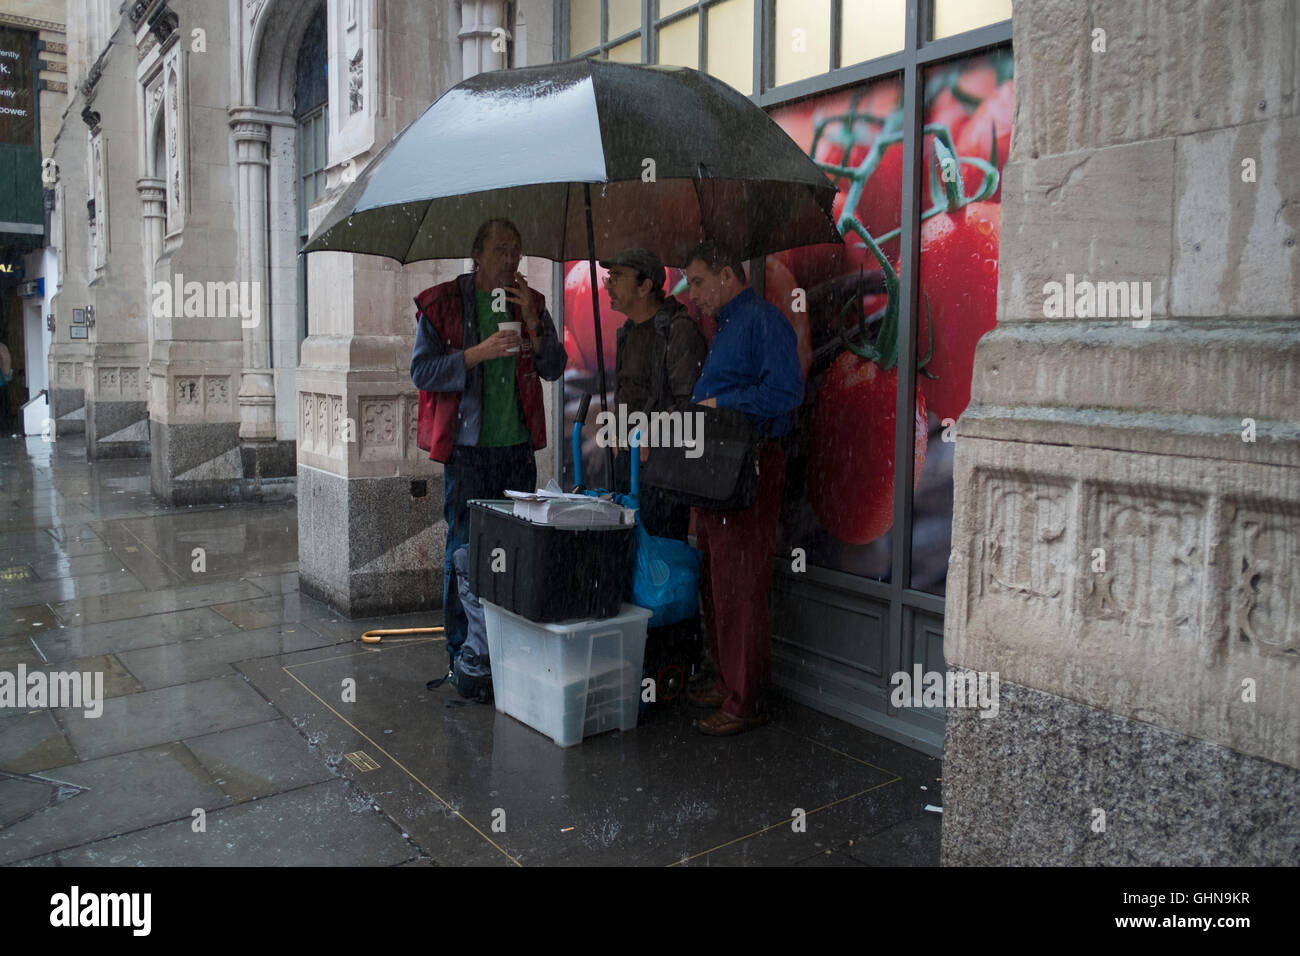 People running for cover or sheltering under umbrellas street scene in the  heavy rain on Bishopsgate in the City of London, England, United Kingdom  Stock Photo - Alamy